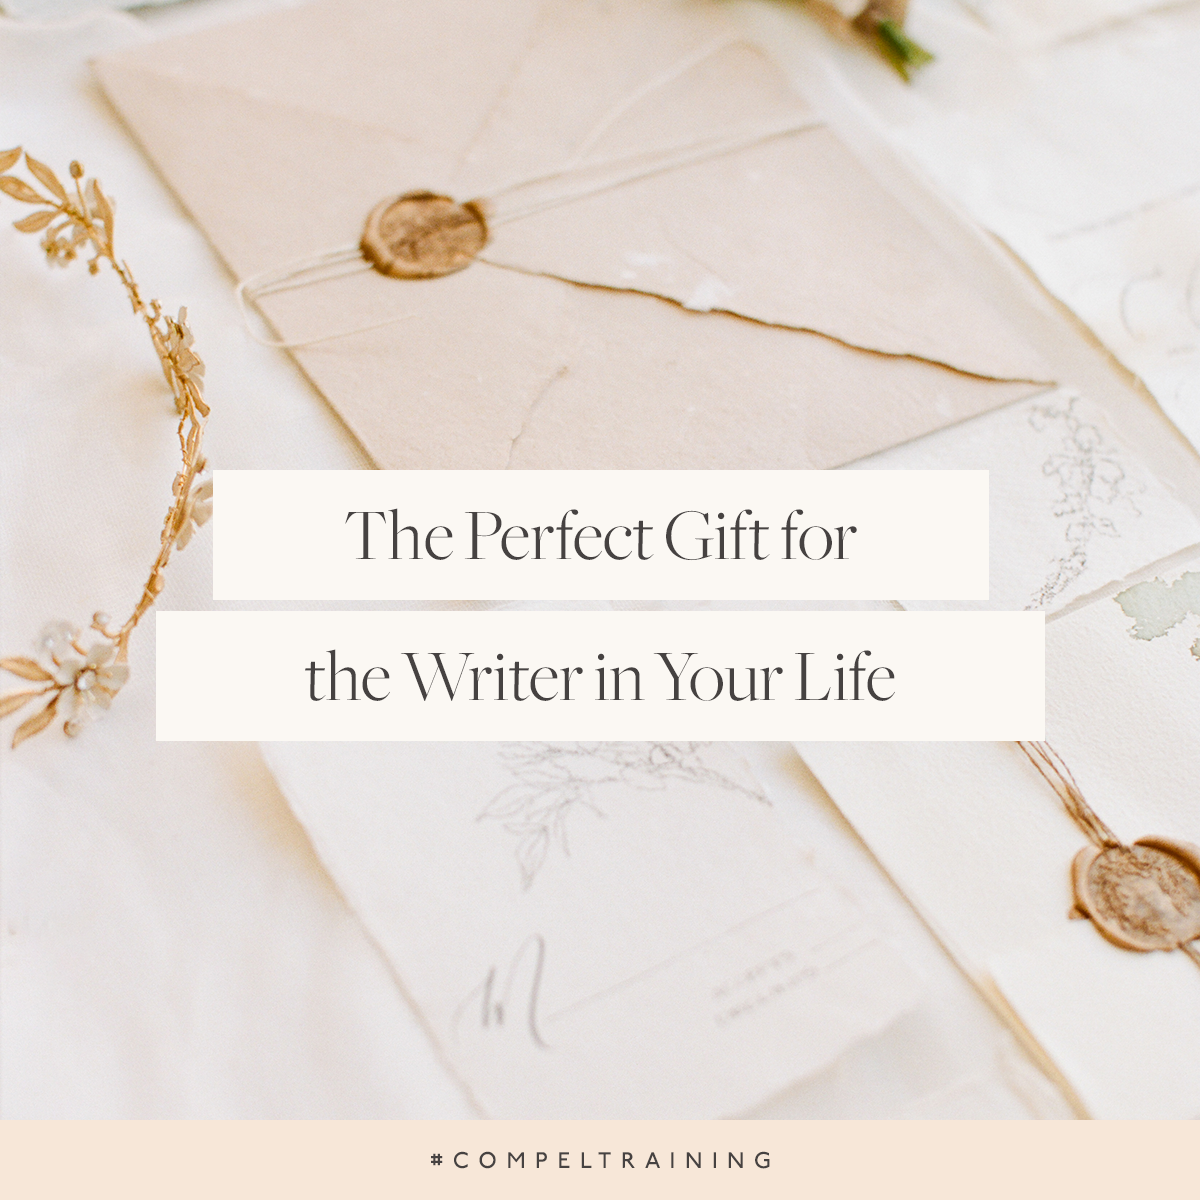 The Perfect Gift for the Writer in Your Life